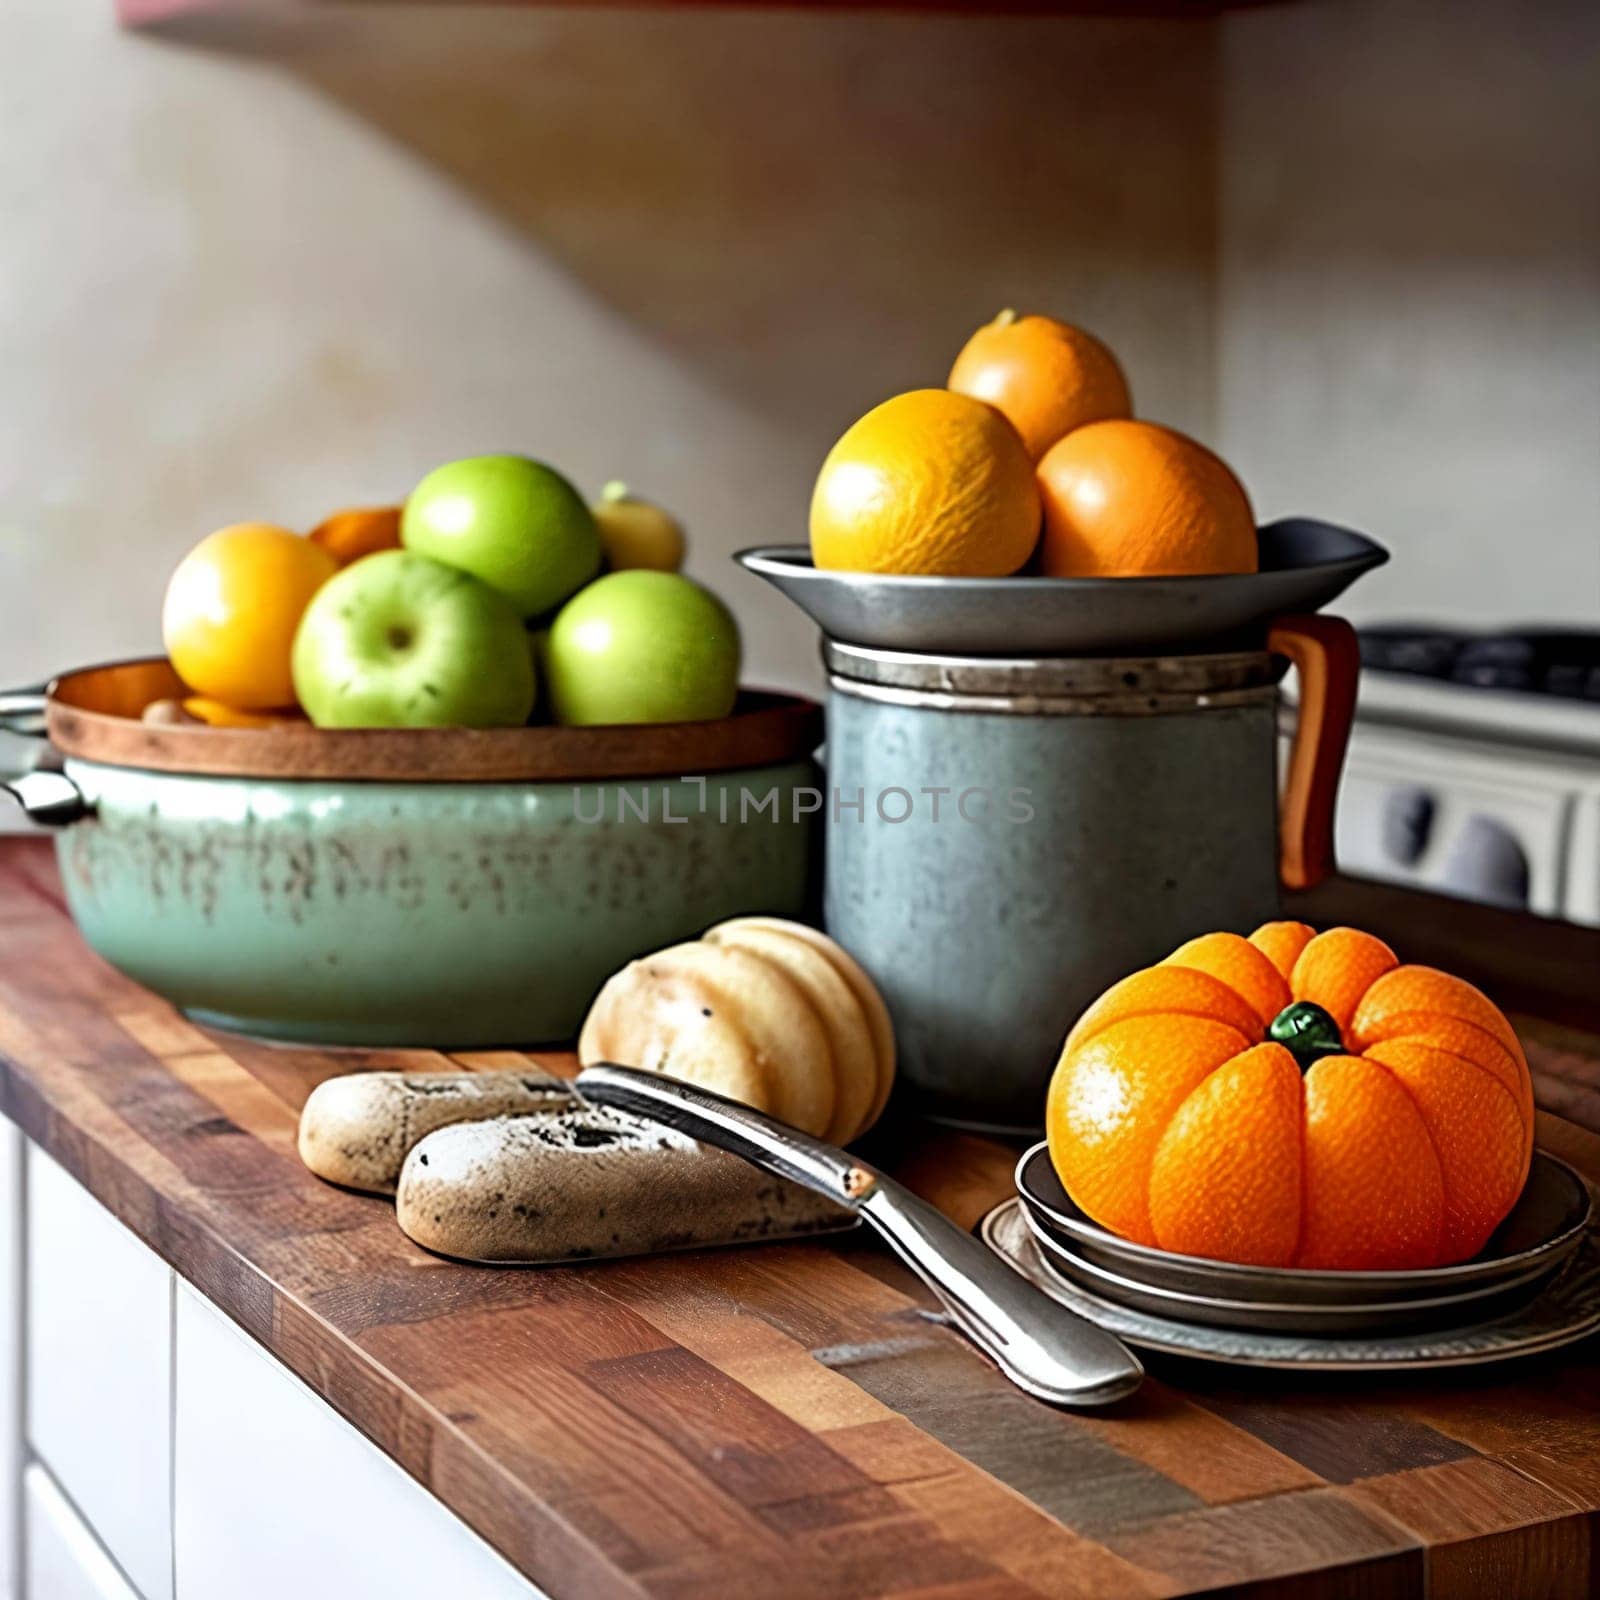 Kitchen Creations. A beautifully styled image of a rustic kitchen counter with fresh fruits, a recipe book, and vintage kitchen utensils